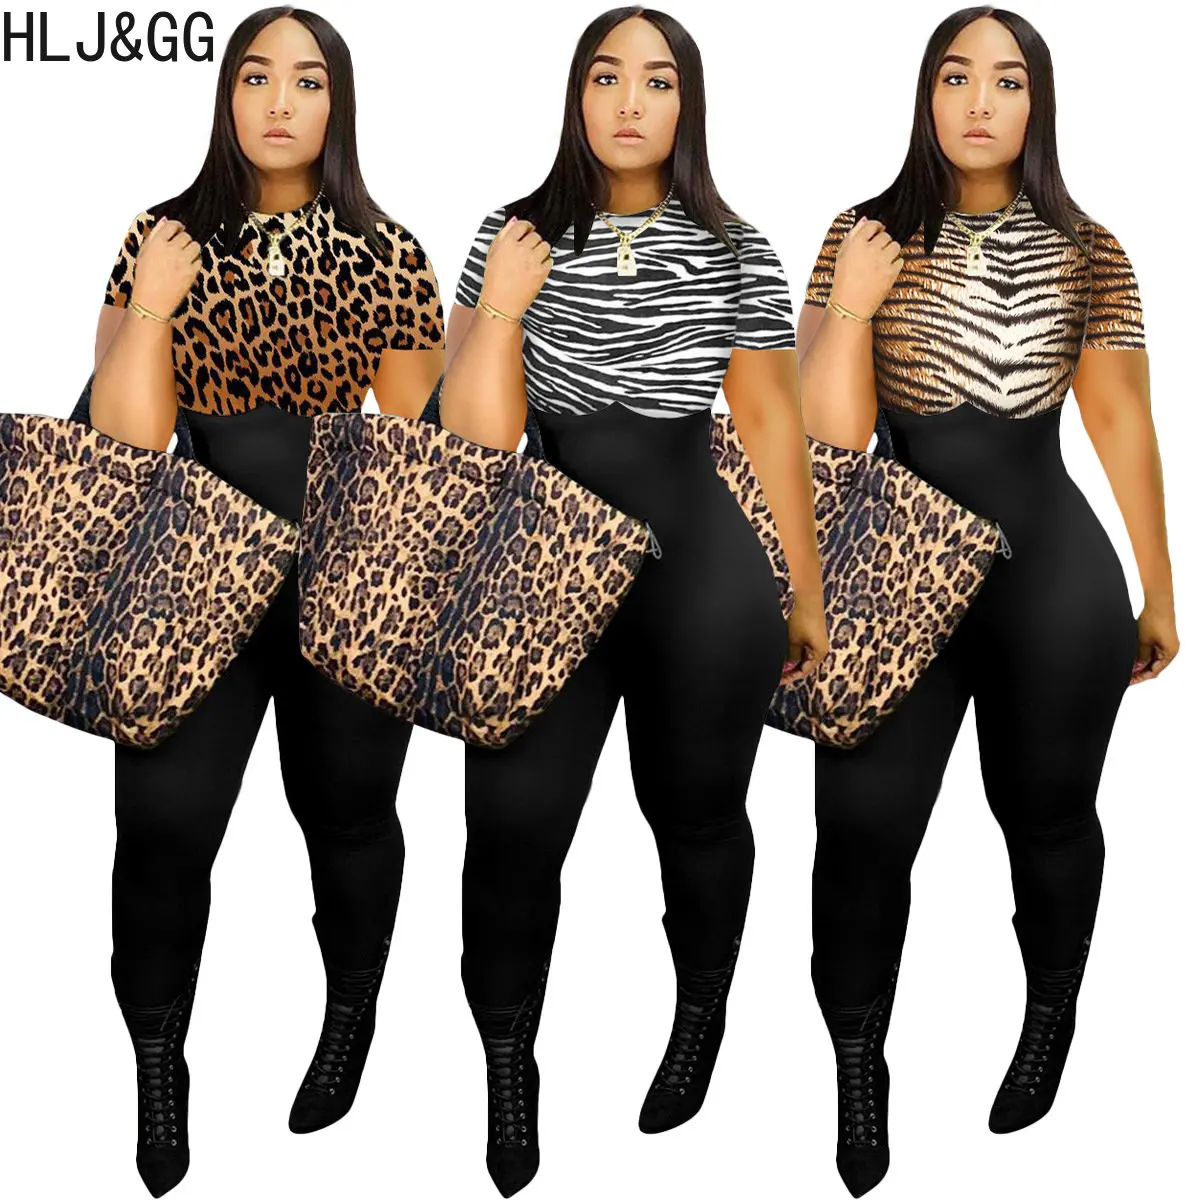 

HLJ&GG Sexy Leopard Print Bodycon Jumpsuits S-4XL Women Short Sleeve Slim Playsuits Casual Jogger Pants One Piece Overalls 2023